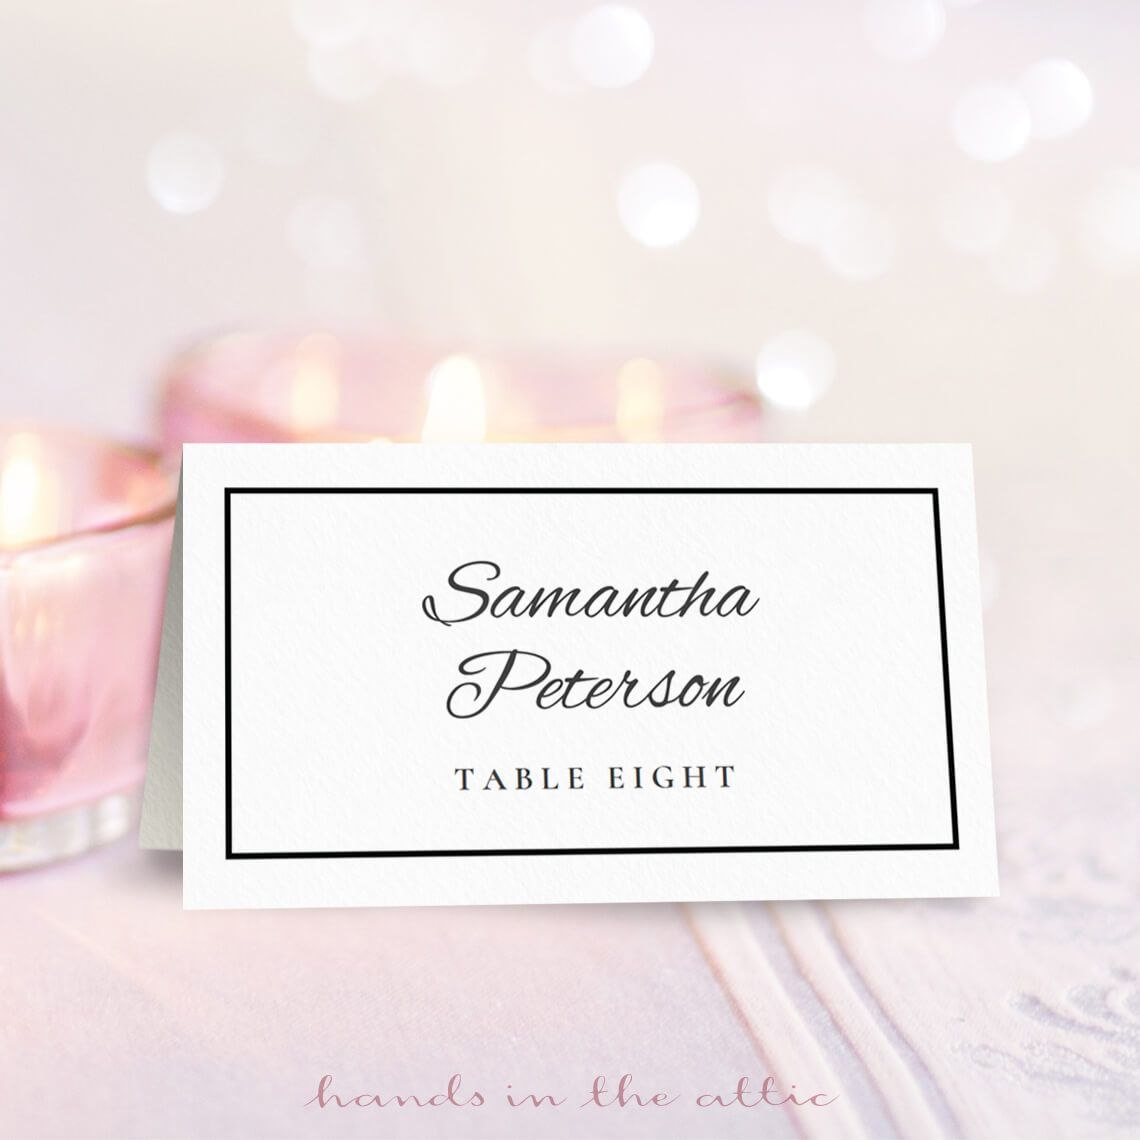 Wedding Place Card Template  Free On Handsintheattic  Free throughout Imprintable Place Cards Template